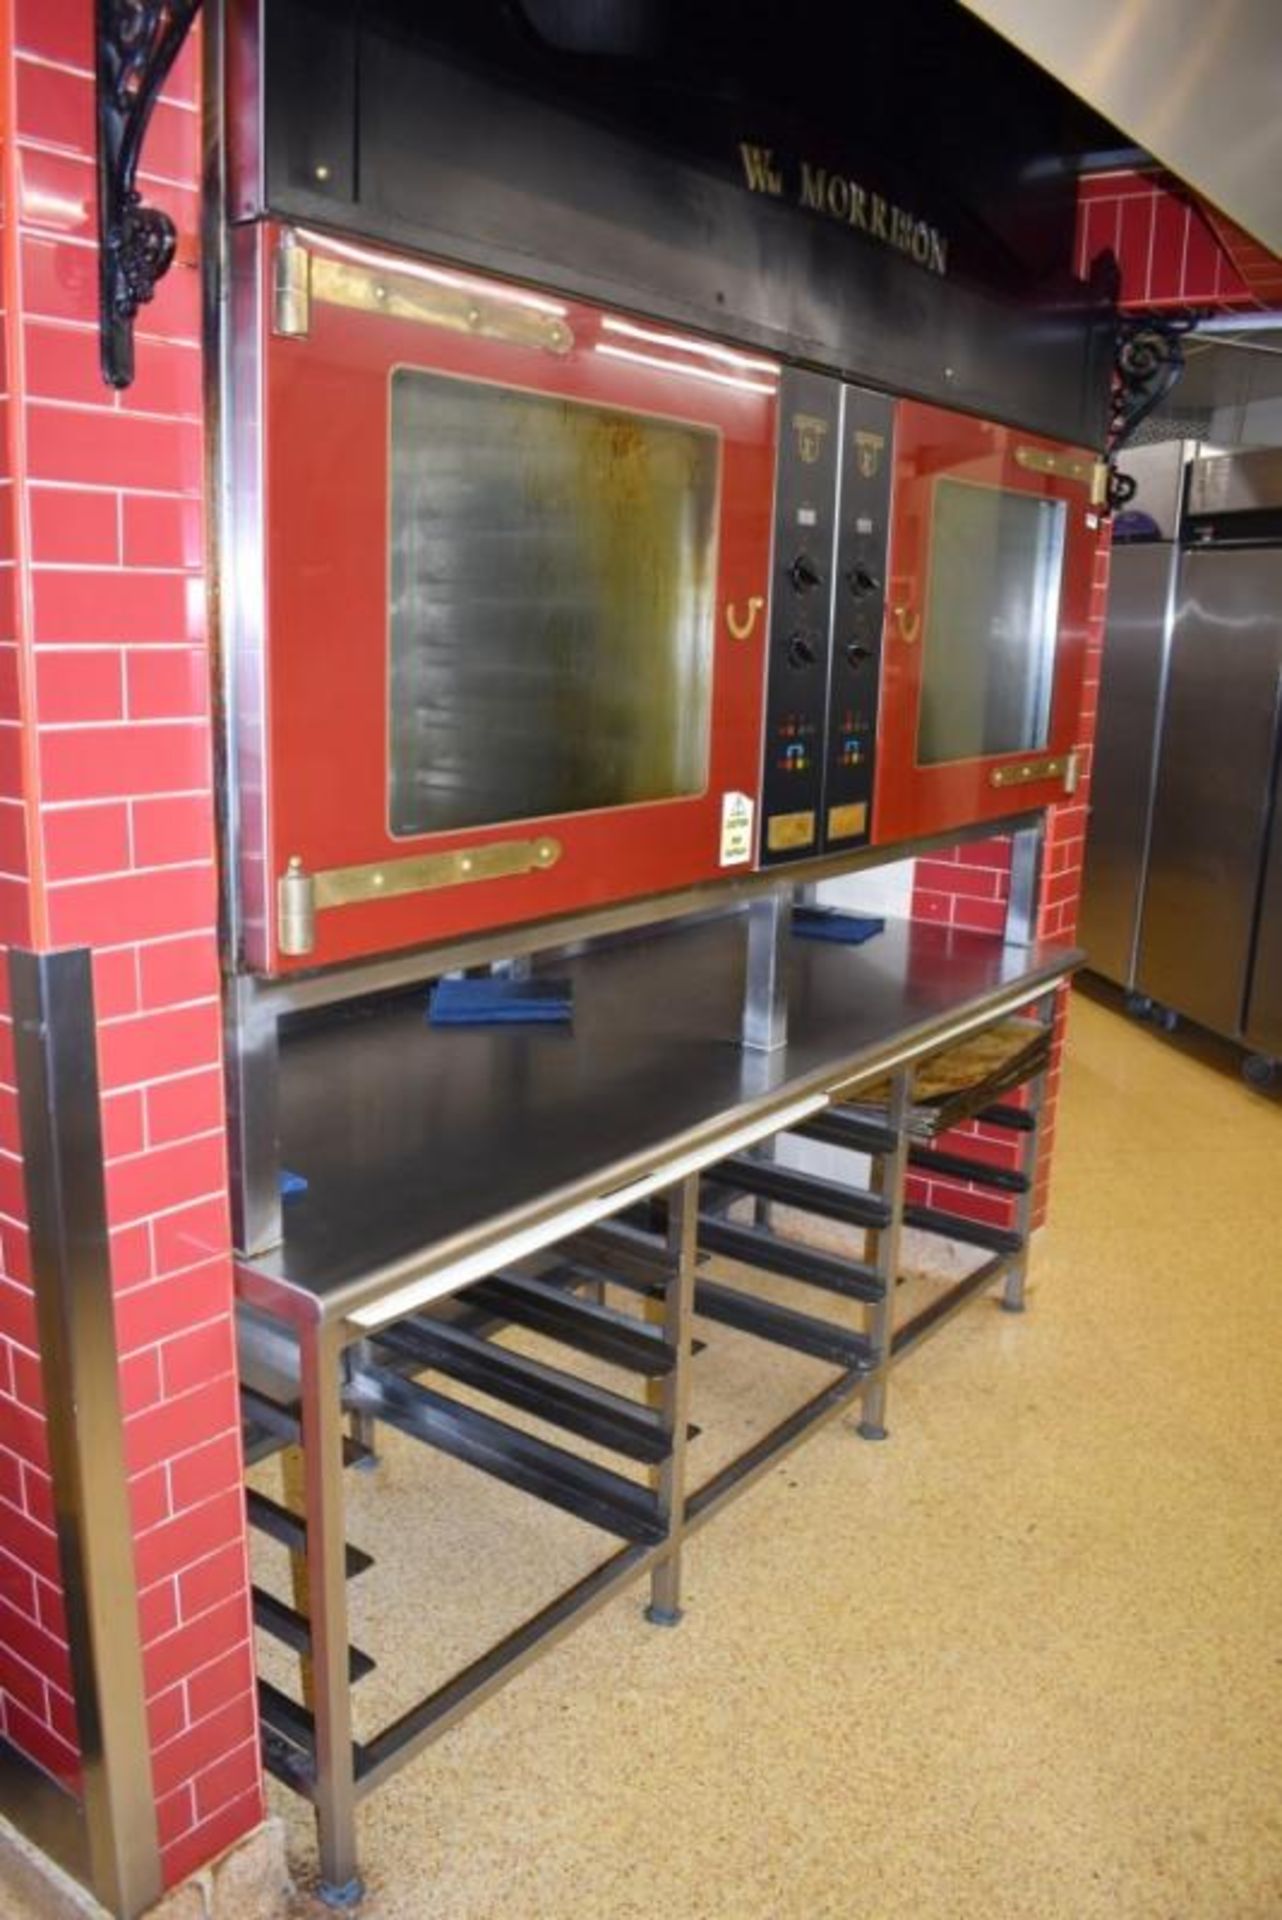 1 x Tom Chandley Double C5 60X40 Pie Oven With Stainless Steel Baking Tray Prep Bench - CL455 - Ref - Image 5 of 18